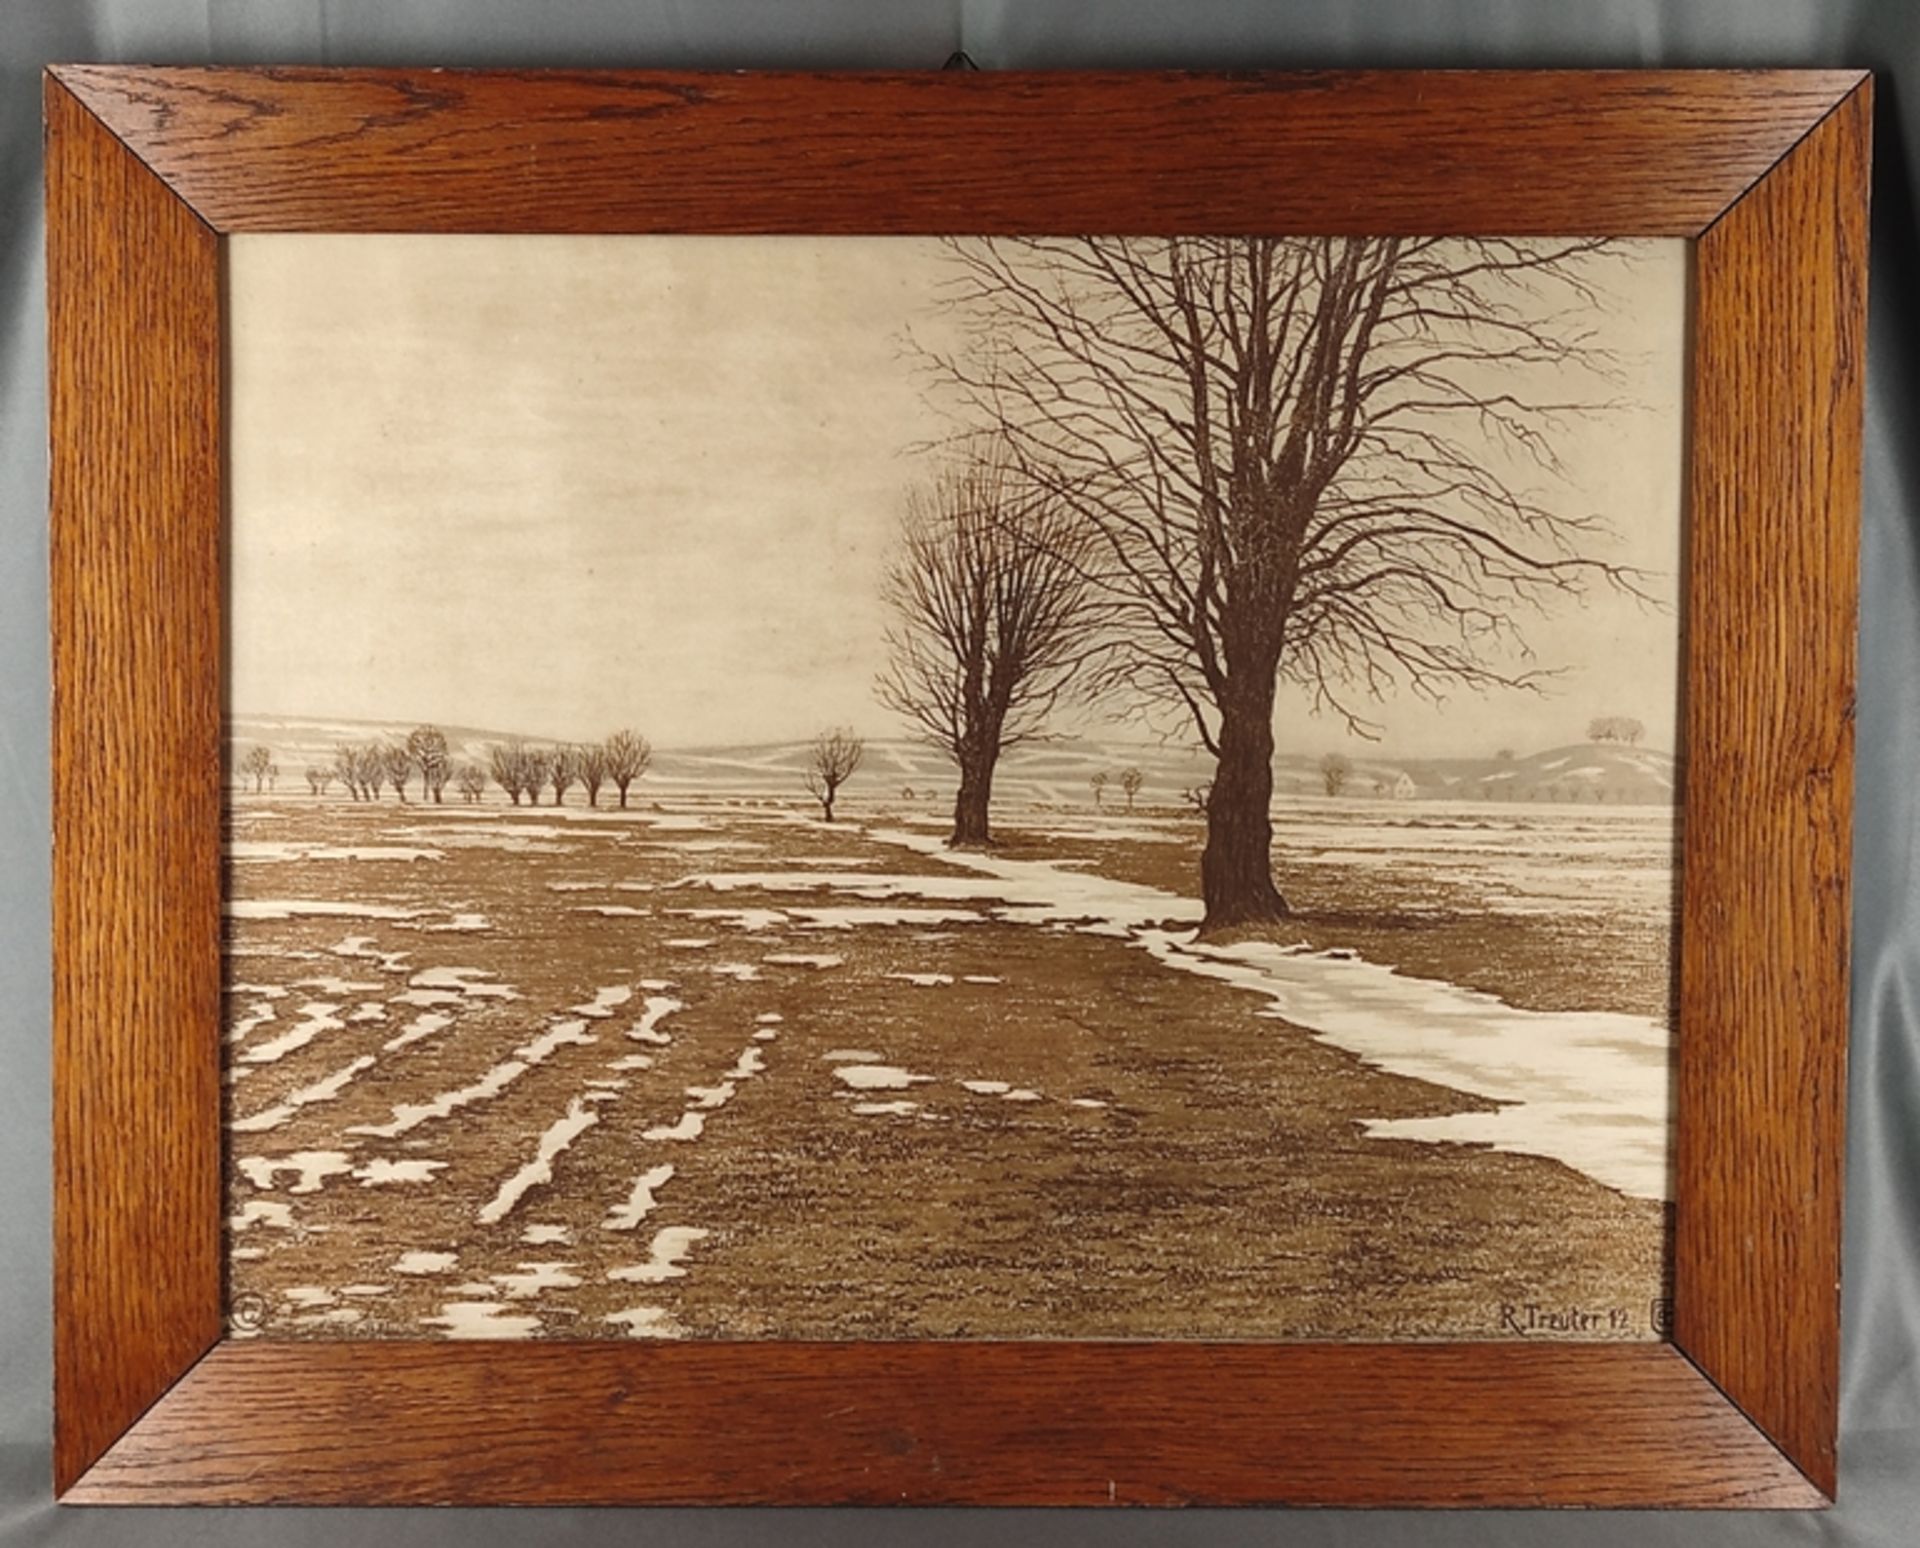 Treuter, Rudolf (1874 - 1950) "Last Snow", view of a field with isolated trees, signed, monogrammed - Image 2 of 3